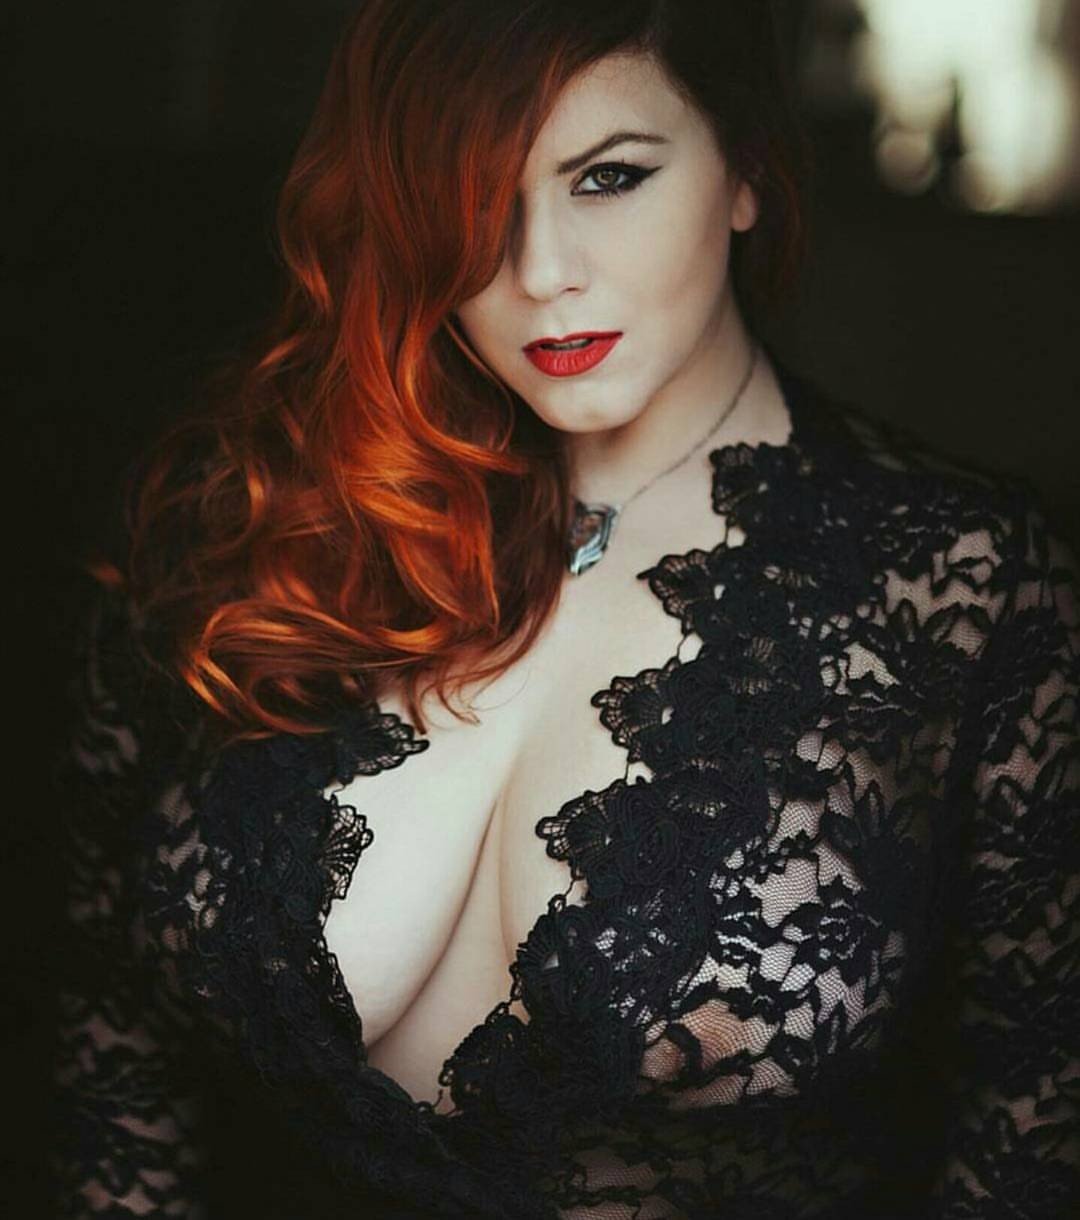 Photo by icurves with the username @icurves,  January 7, 2016 at 1:33 PM and the text says 'londonandrews:

“In a Society that profits from your self doubt, liking yourself is s rebellious act” - Photo by @marie_killen Hair by @helloblondee #honormycurves #effyourbeautystandards #londonandrews #curves #plusmodel #plusblogger #bodypositive..'